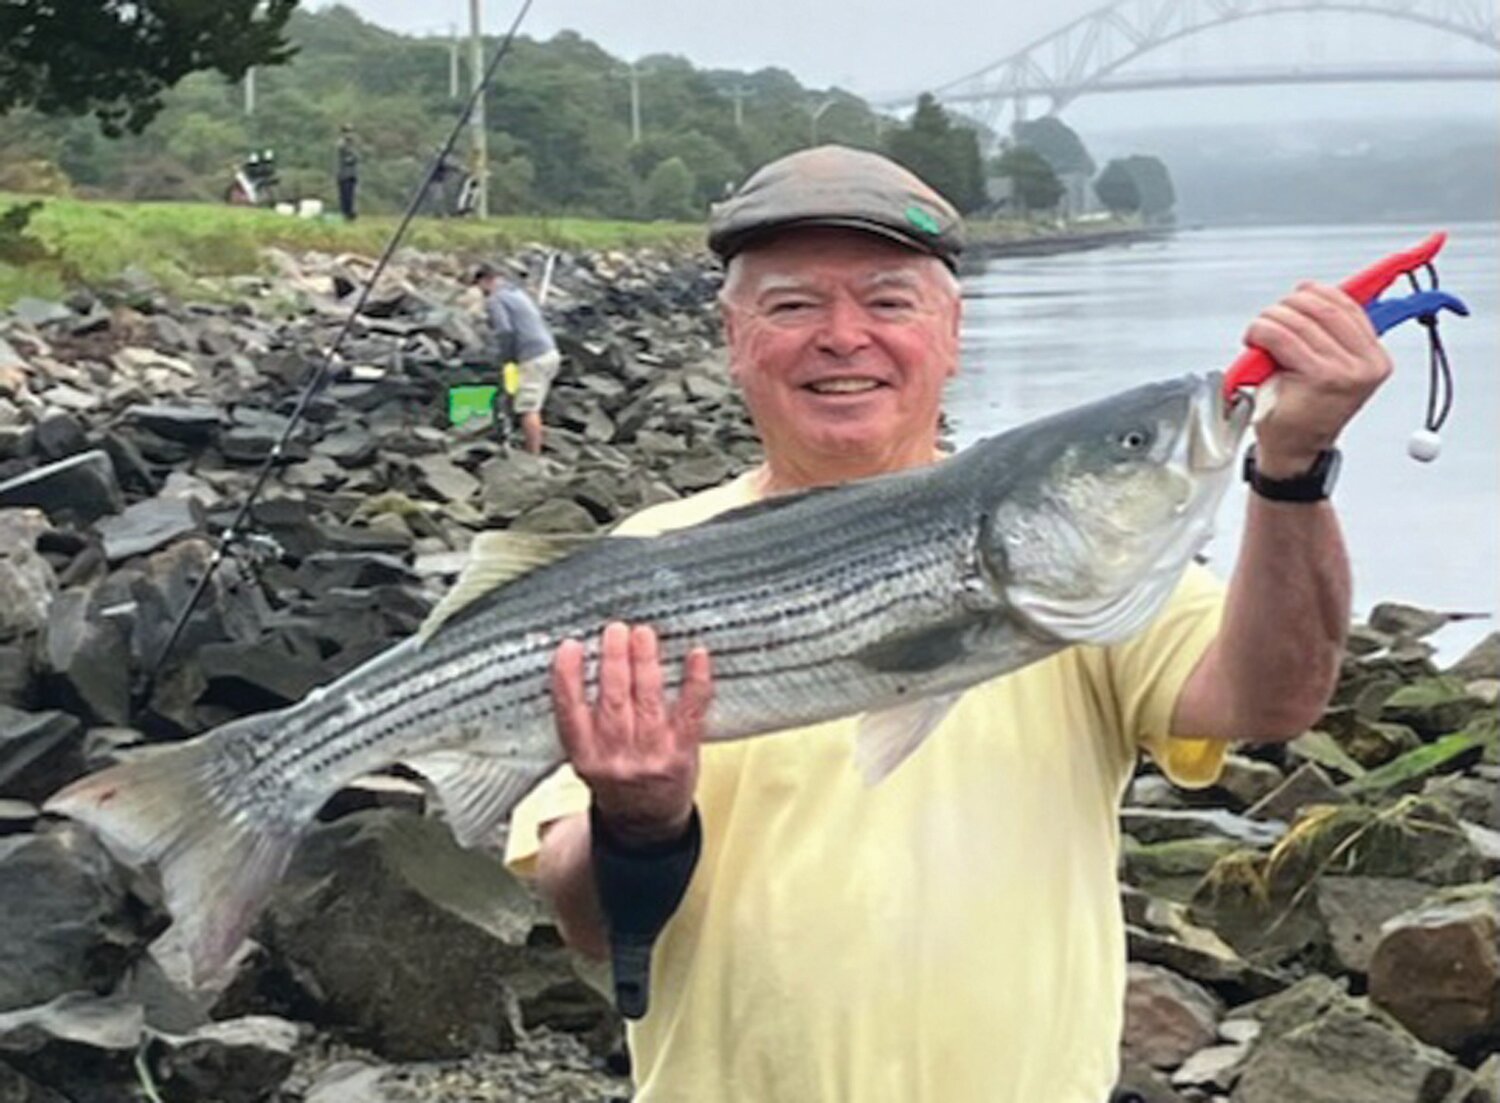 EXPERT CATCH: East End Eddie Doherty, Cape Cod Canal striped bass expert and author said, “The fall migration on the Canal has been very good this year.” (Submitted photo)